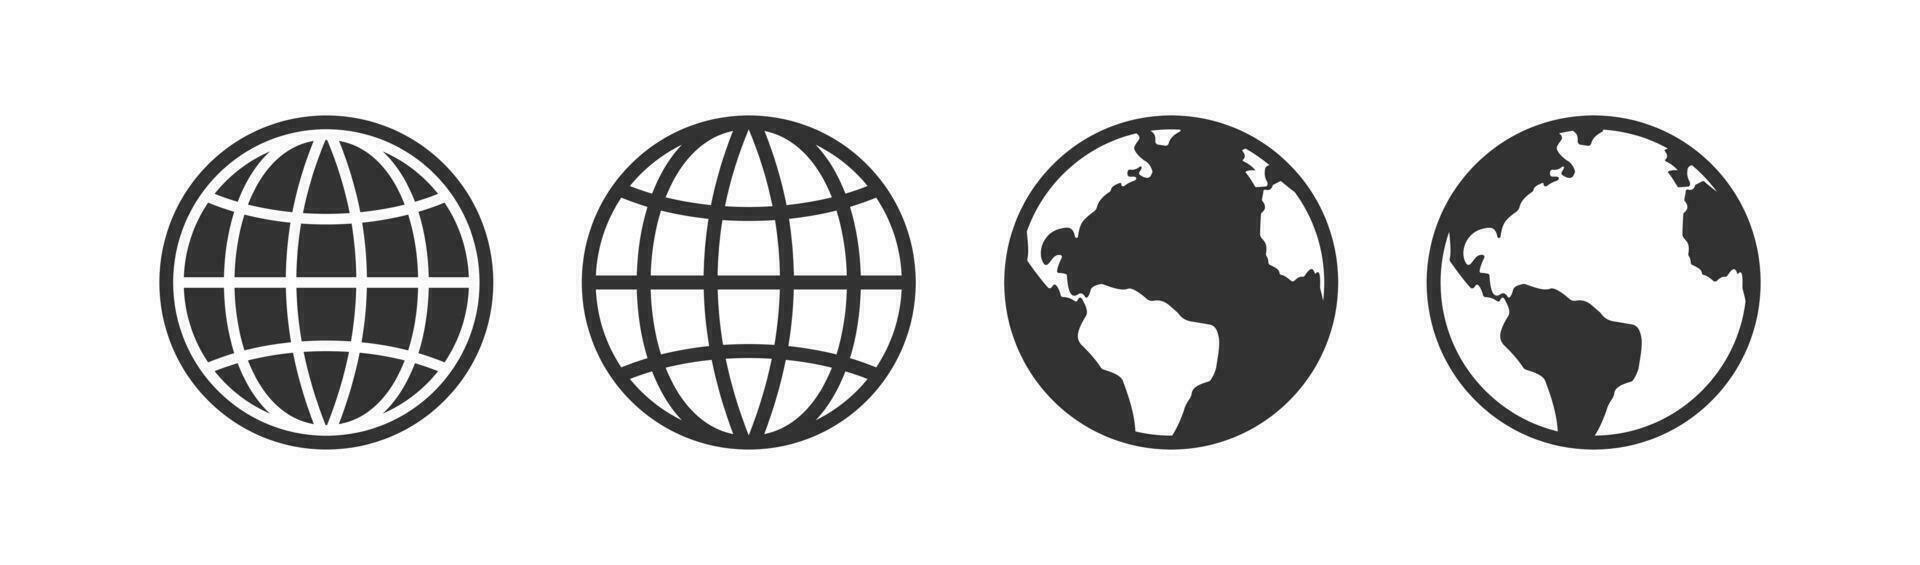 Globe icon. Internet symbol. World signs. Earth symbols. Global web icons. Black color. Vector isolated sign.